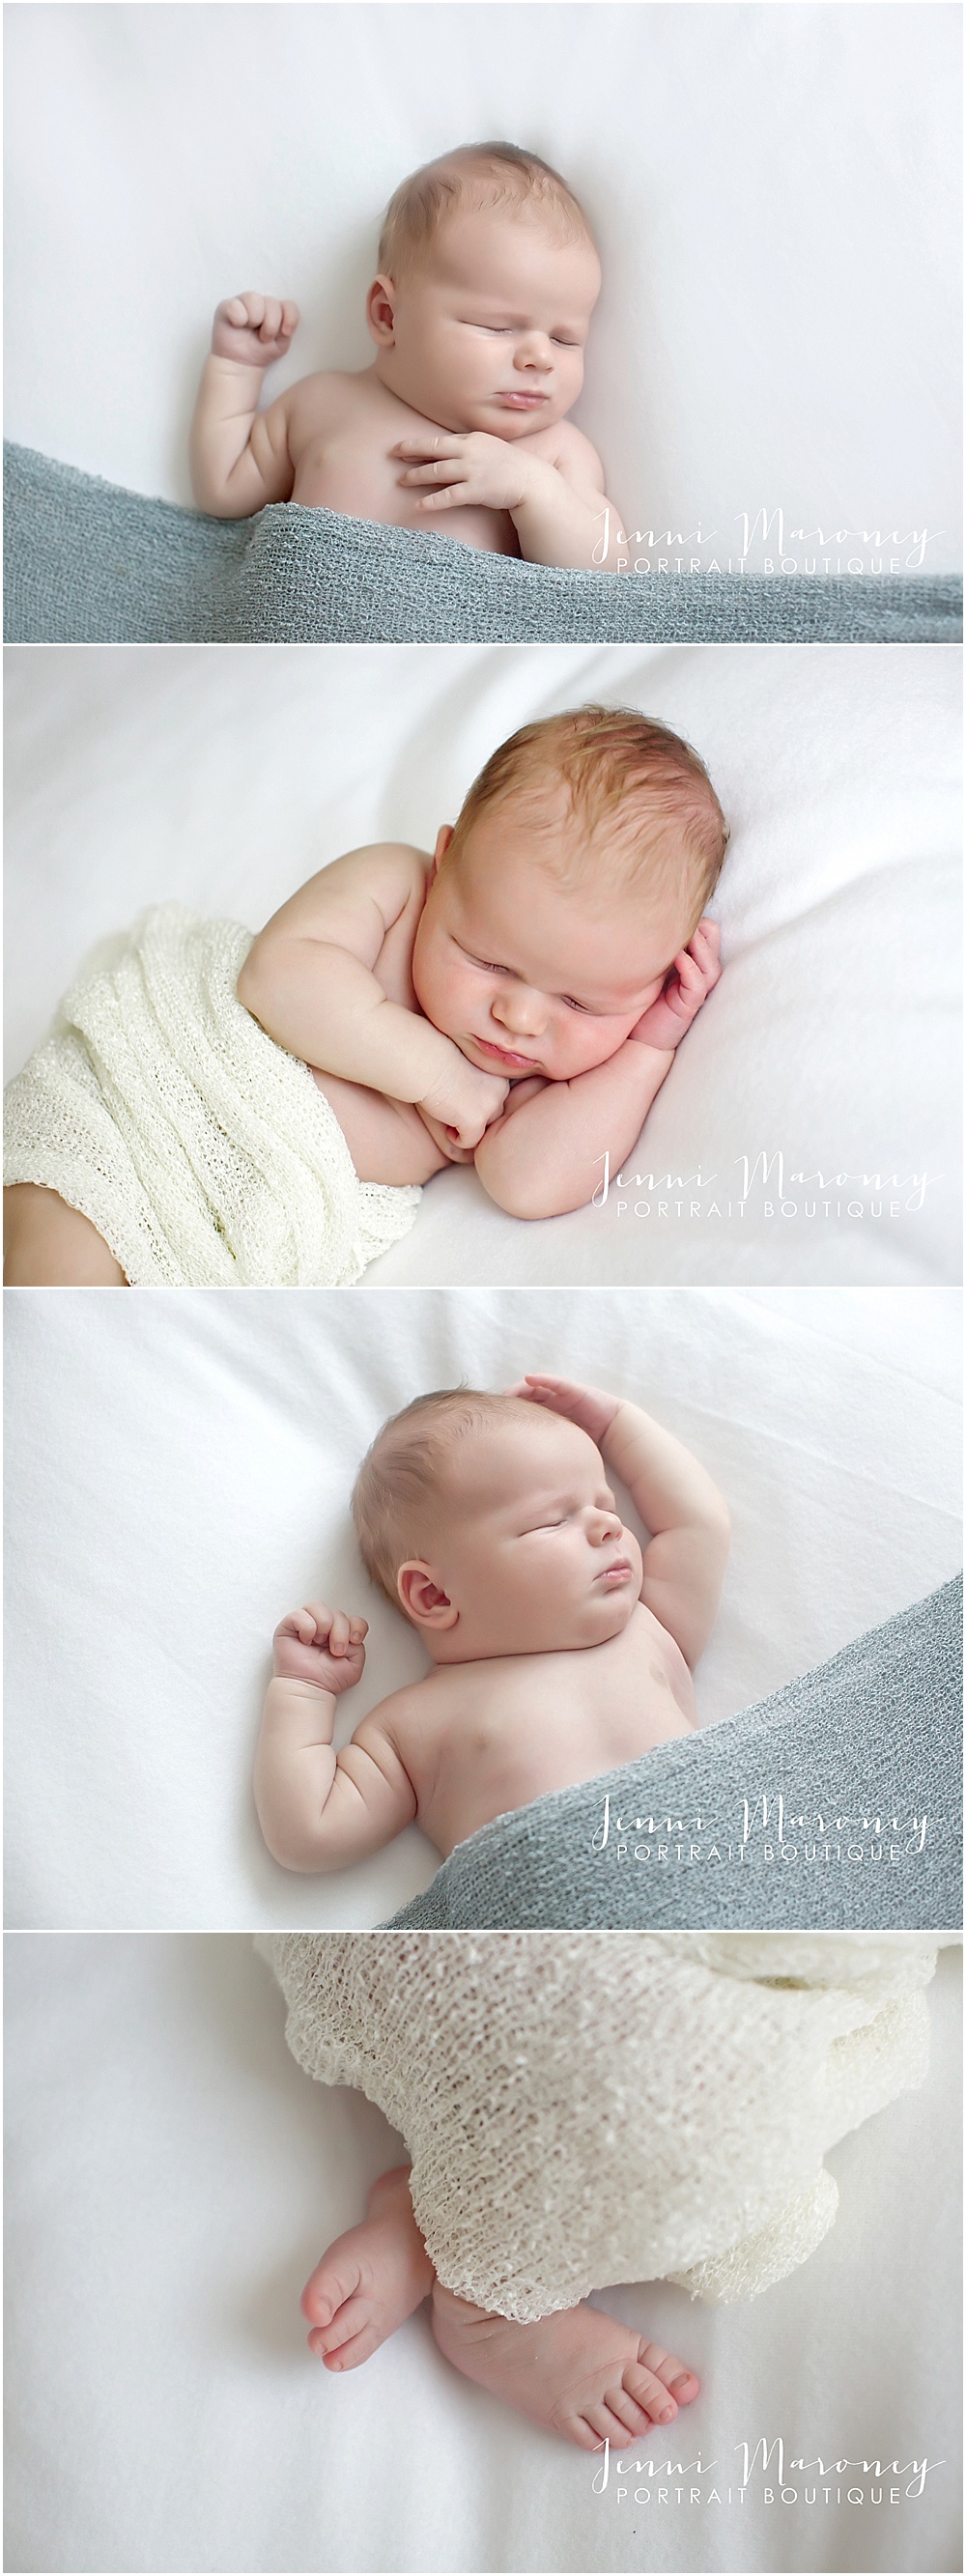 Denver newborn photographer and Boulder baby photographer, Jenni Maroney shares an in-studio all natural newborn photography session with a little baby boy. 